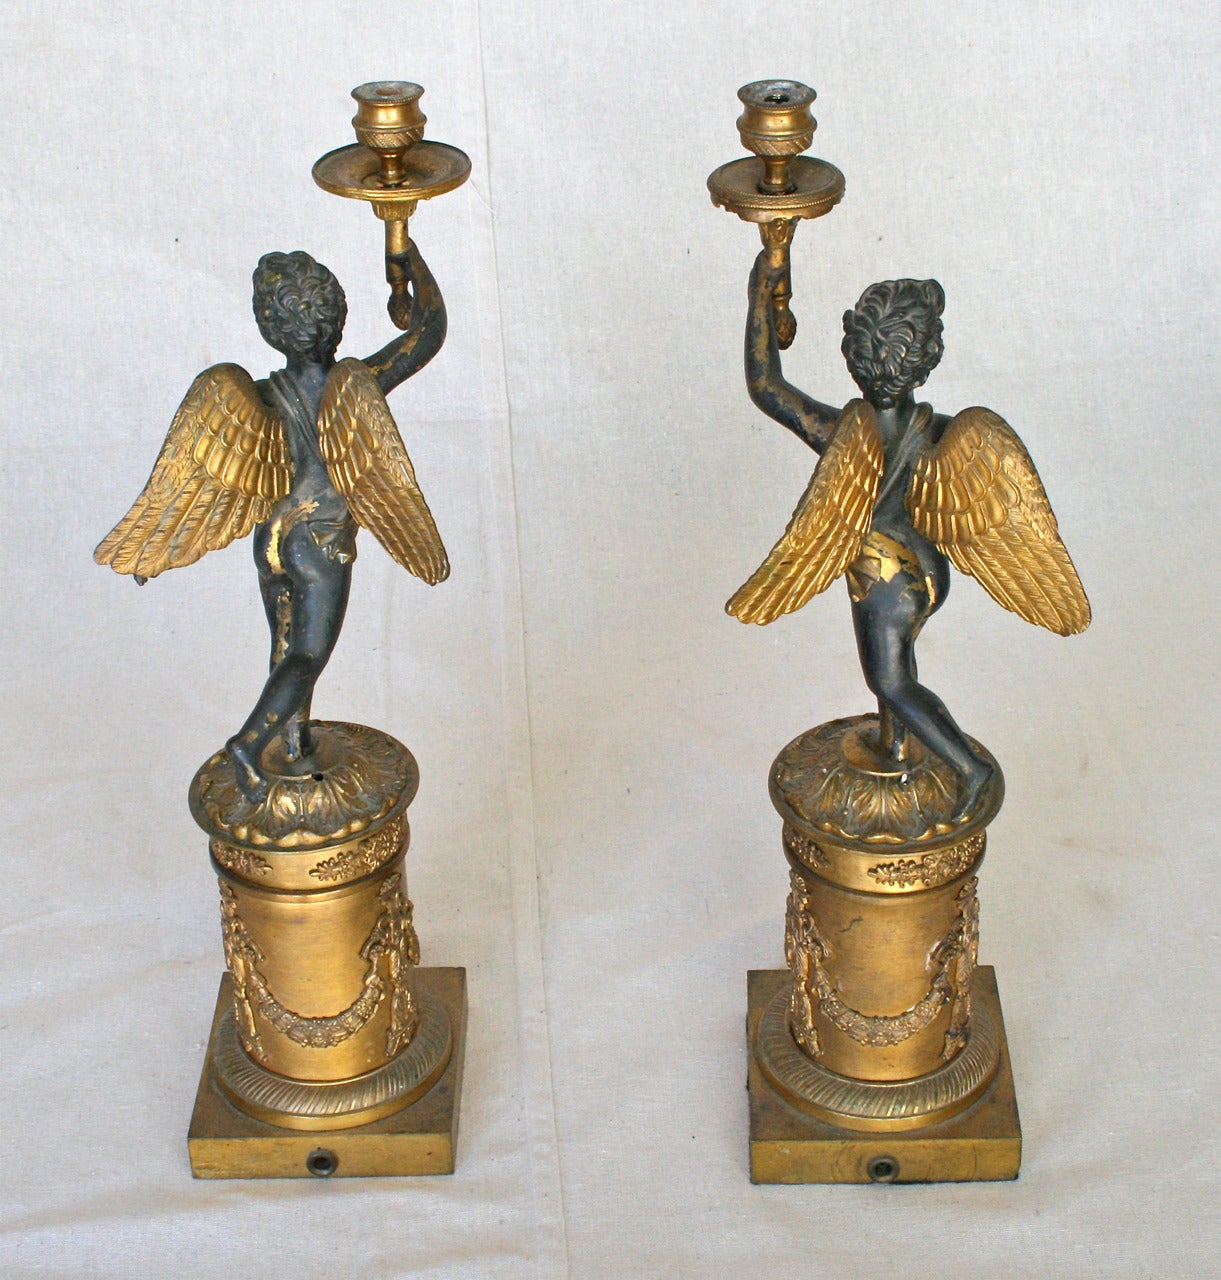 A large pair of late 19th century French Empire style gilt bronze candlesticks depicting winged putti. Each charming cherub is unique from the other.